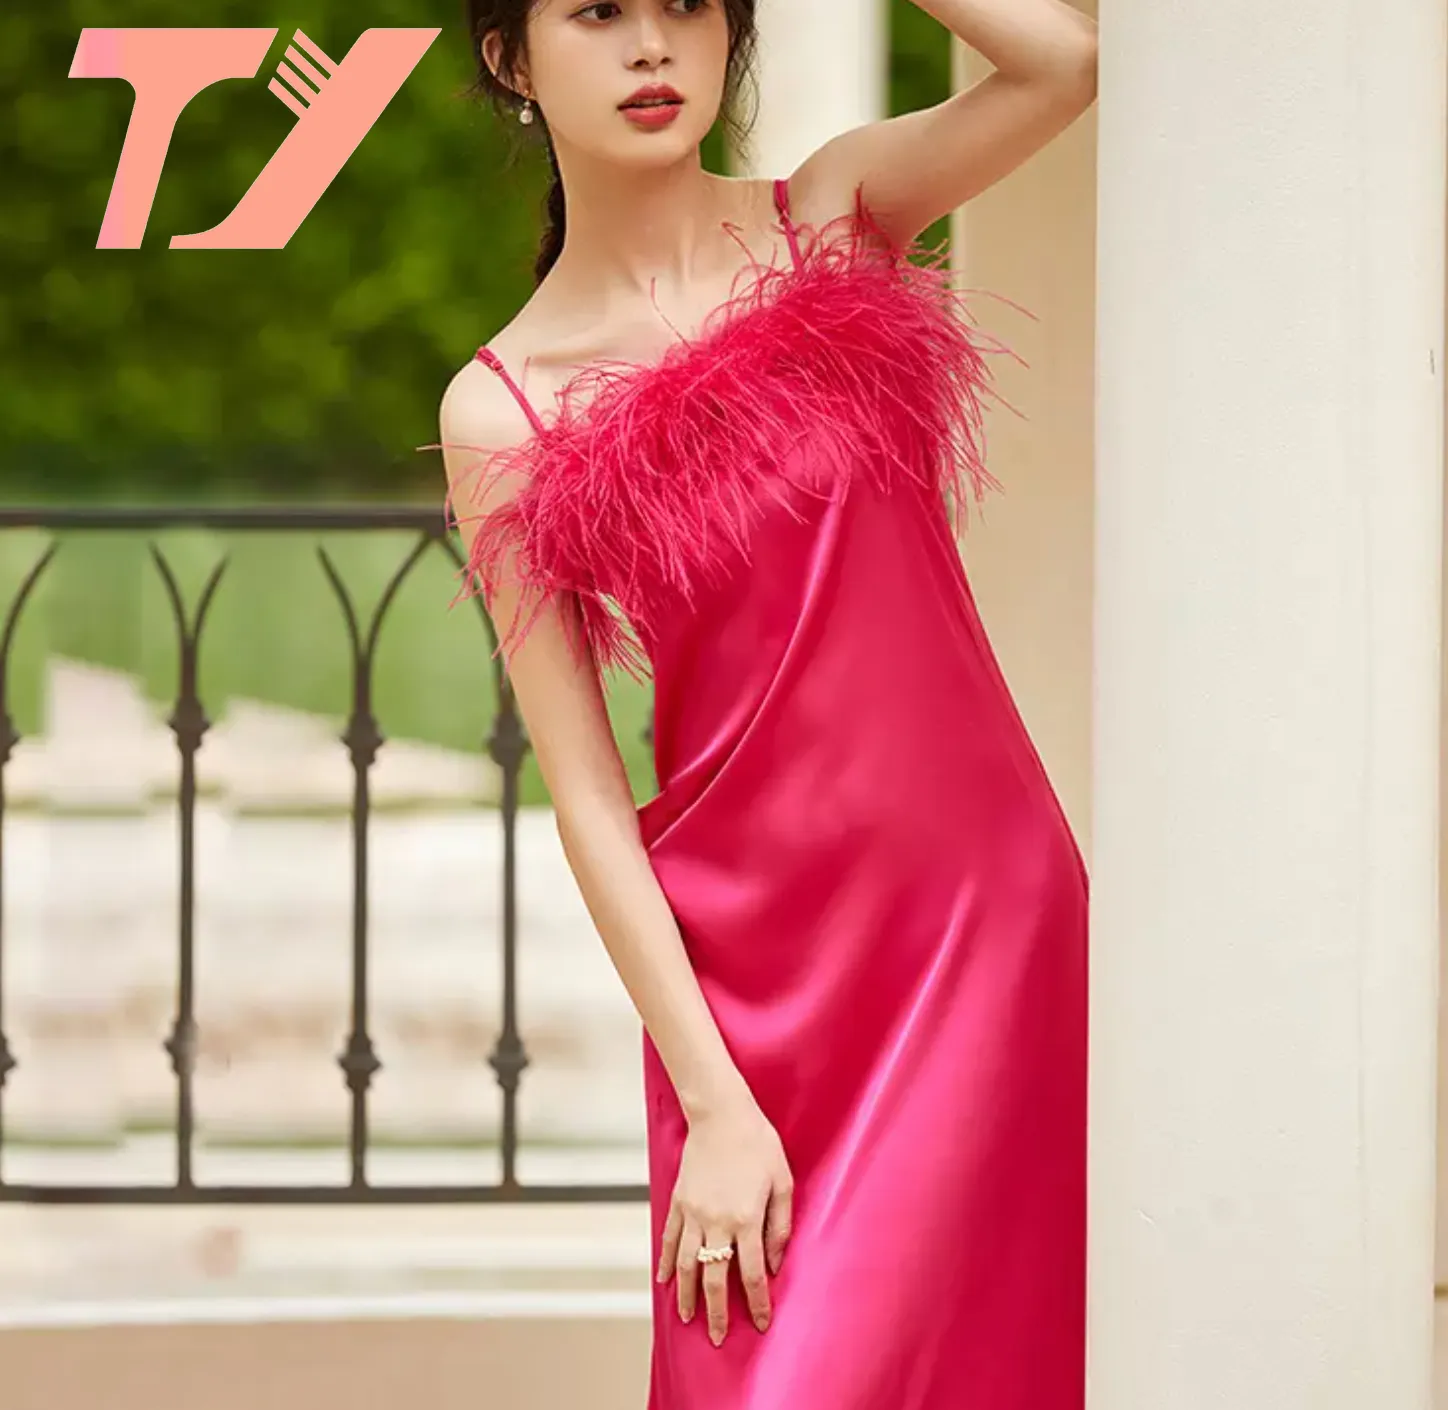 New Fashion Women Girls cocktail dresses Solid Color Feather Big Hem Nightgown Long Skirt